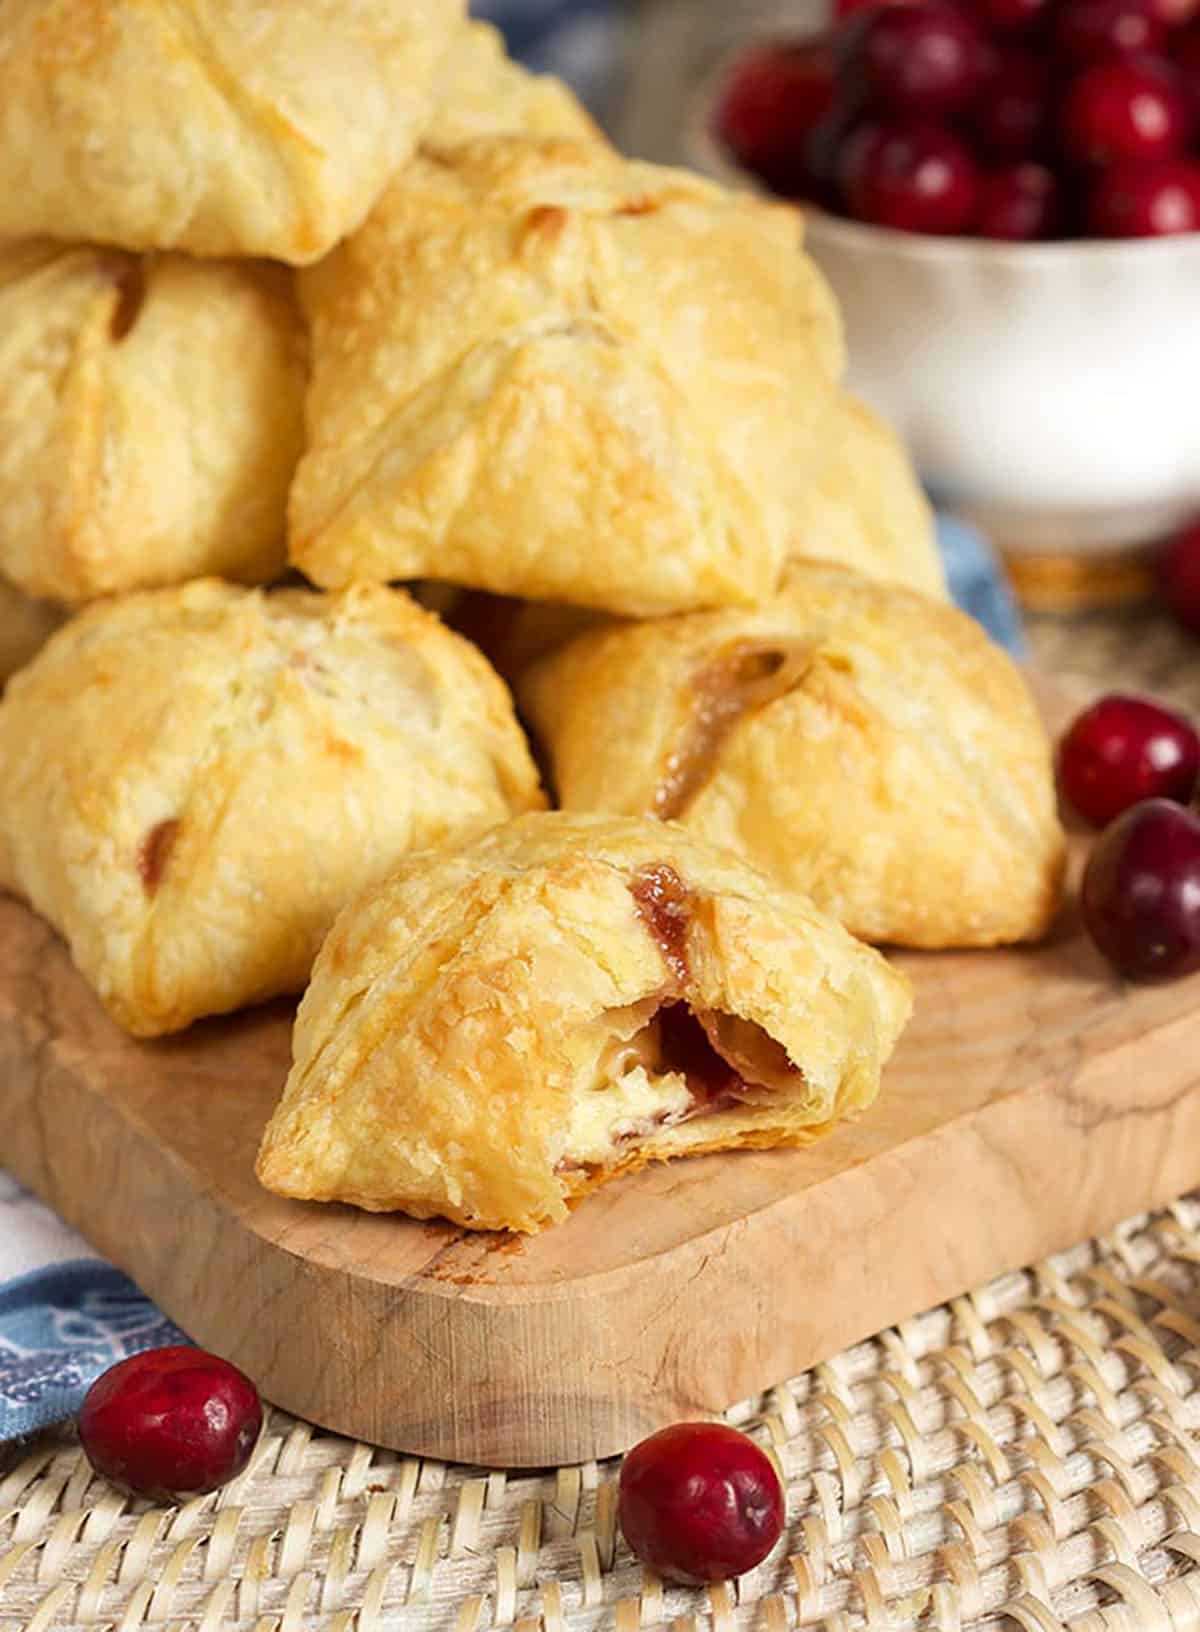 Cranberry Brie Bites Stacked on a board with one having a bite taken out of it.